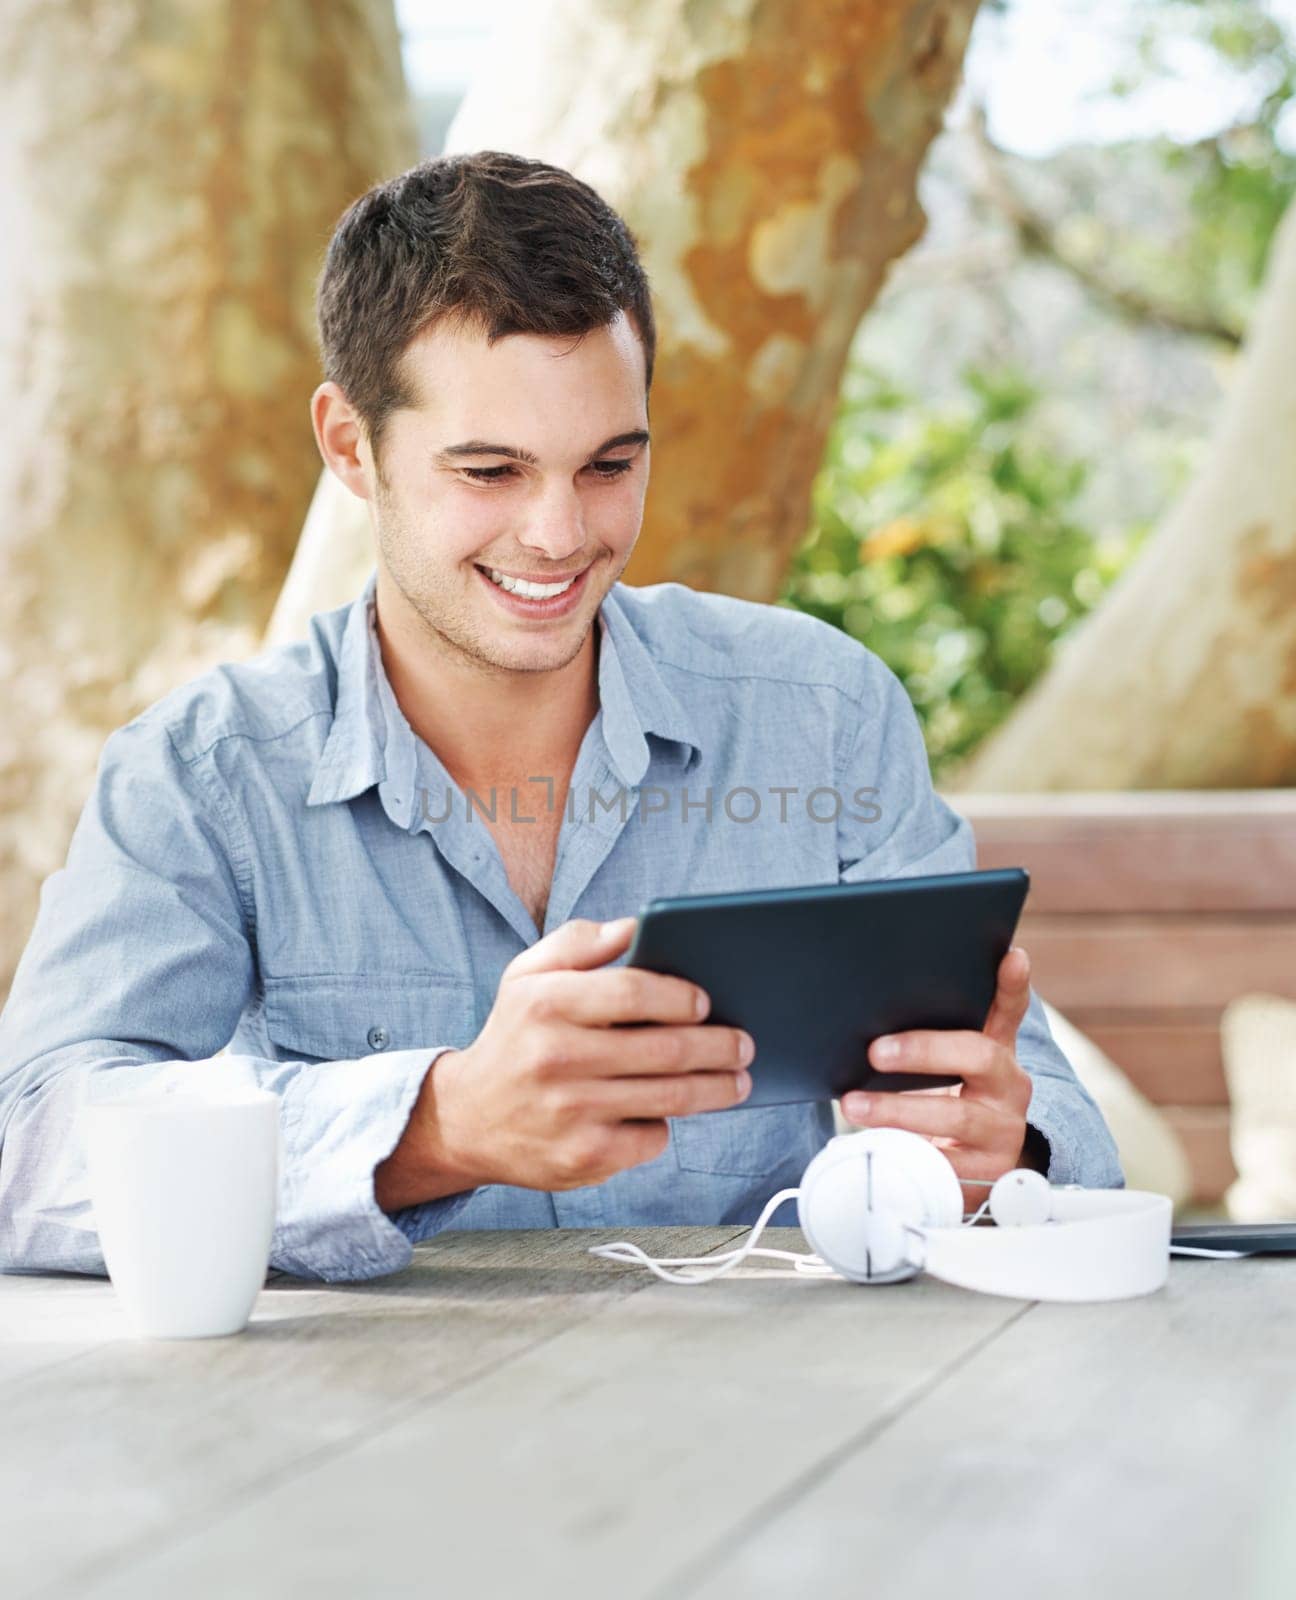 Smile, park and man with tablet in nature on table for networking, email and freelance job. Happy, digital nomad and graphic designer with tech in garden for creative research, feedback and review.